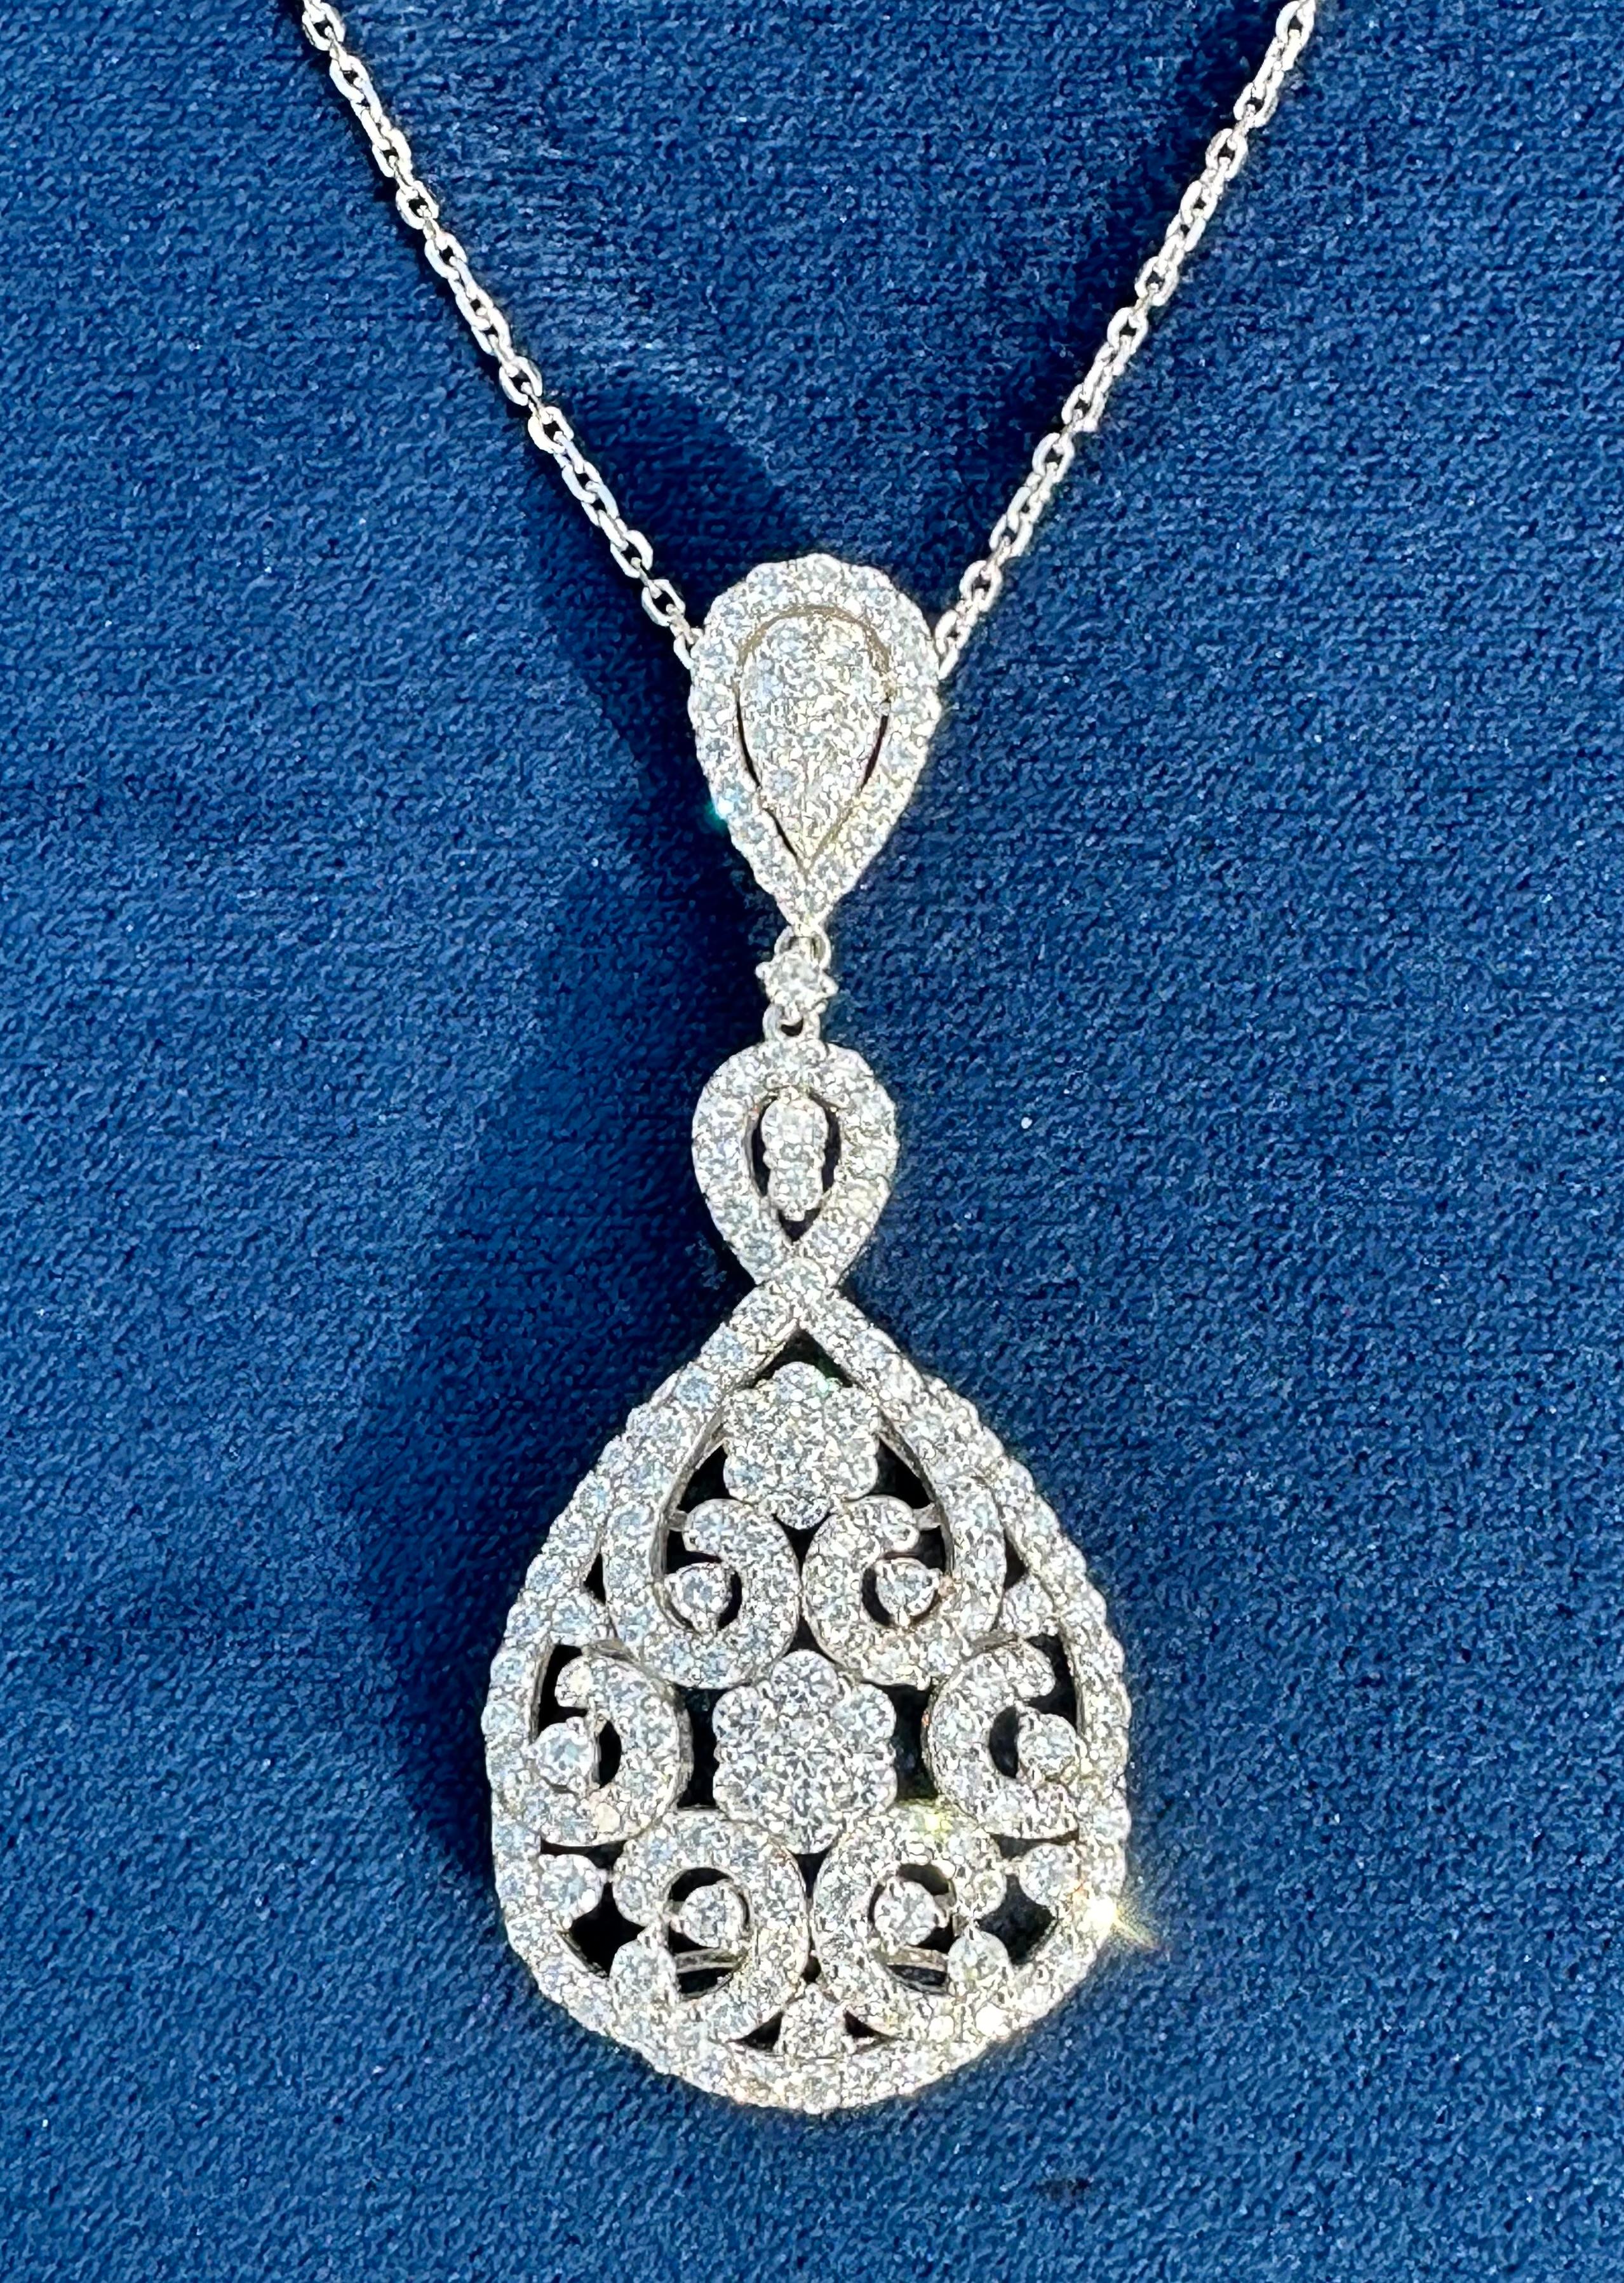 Magnificent 8.5 Carat Diamond 18K White Gold Pear Shaped Drop Pendant on Chain For Sale 2